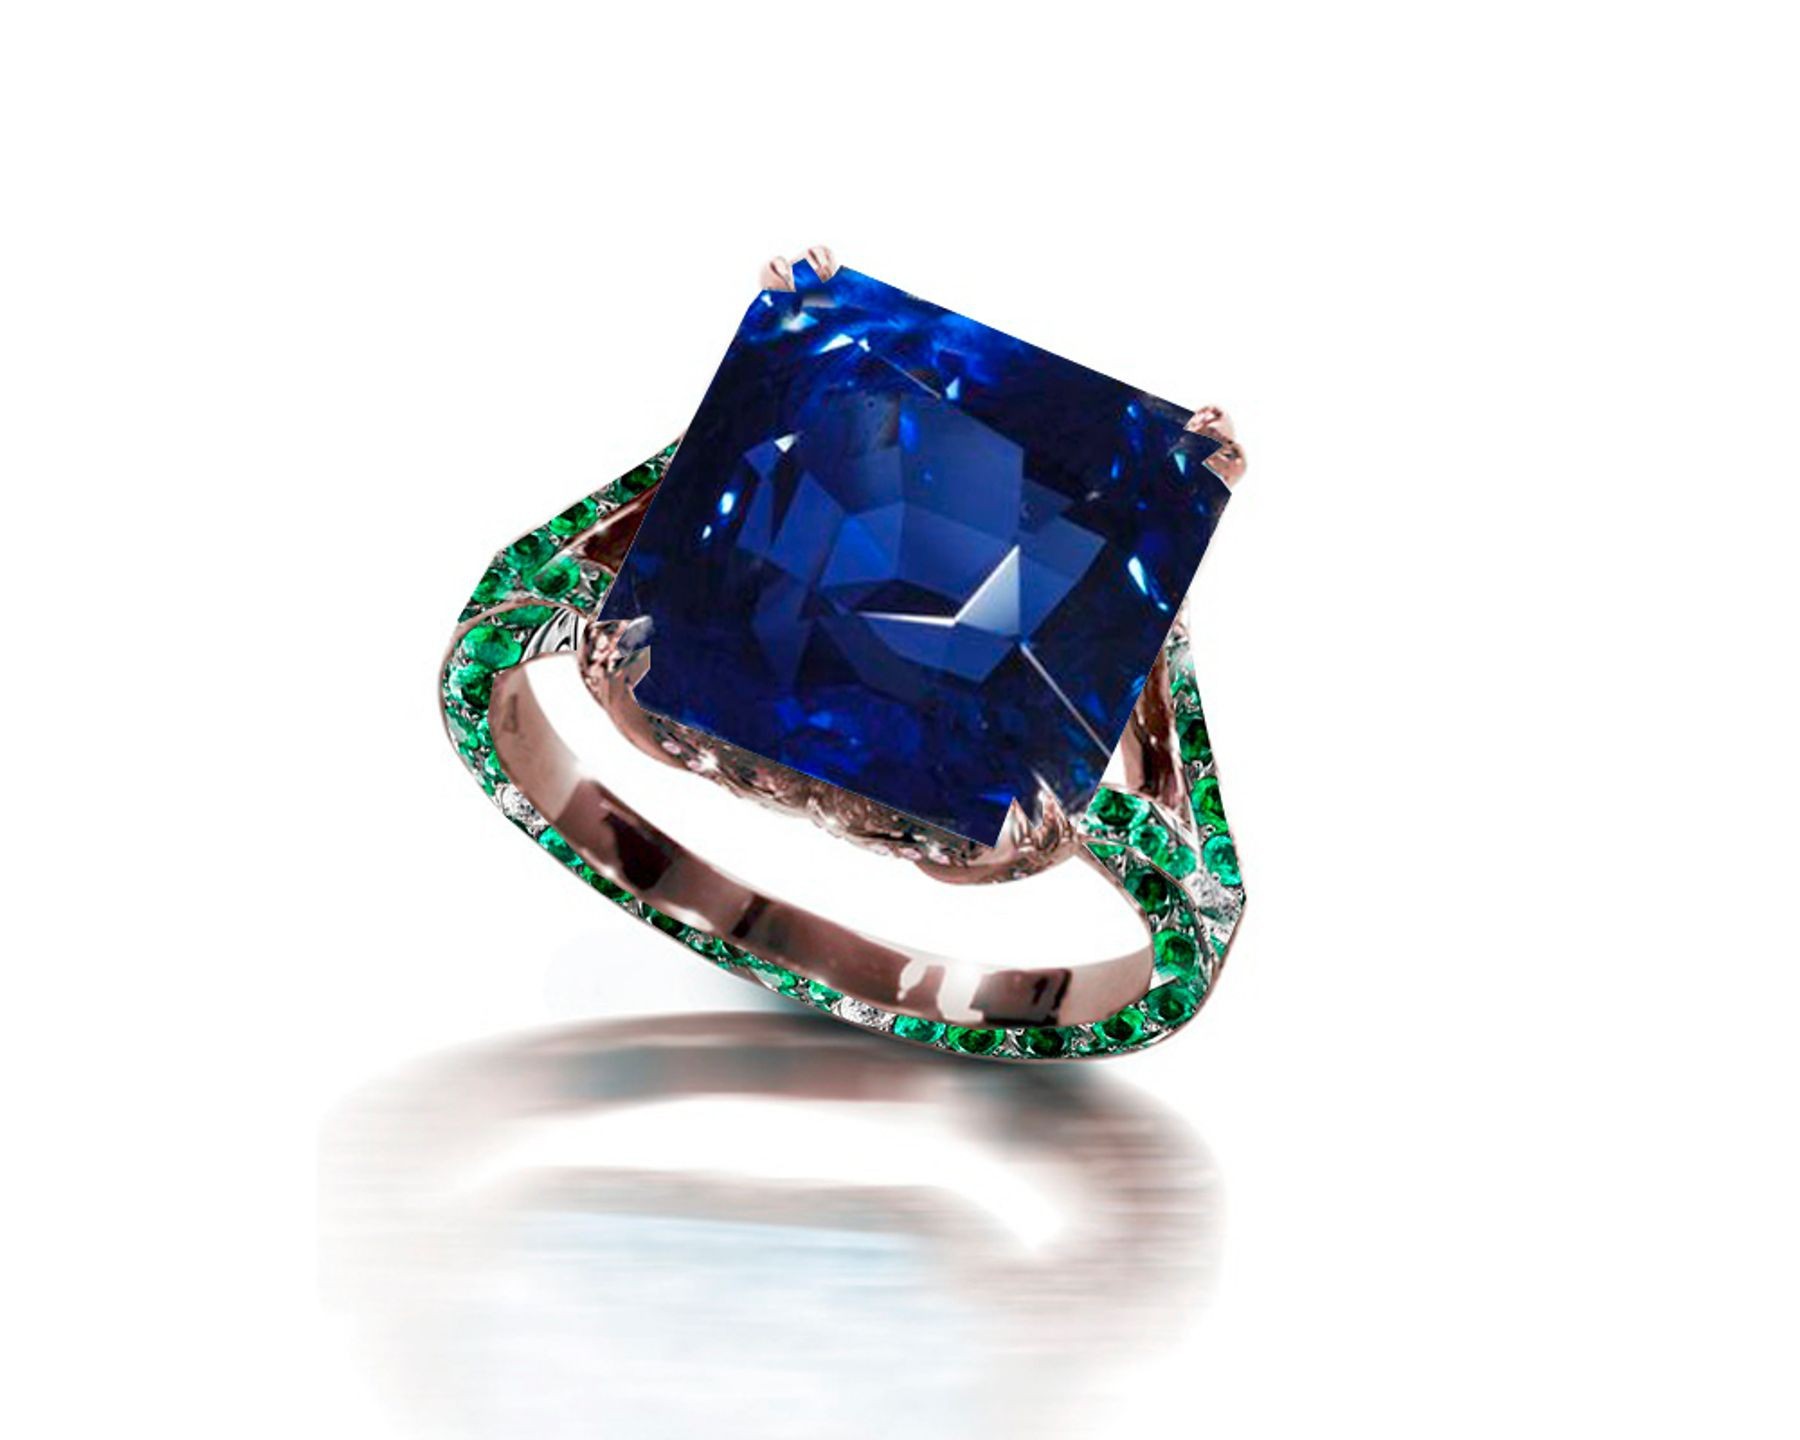 Ring with Square Sapphire & Pave Set Emeralds & White Diamonds in Gold or Platinum